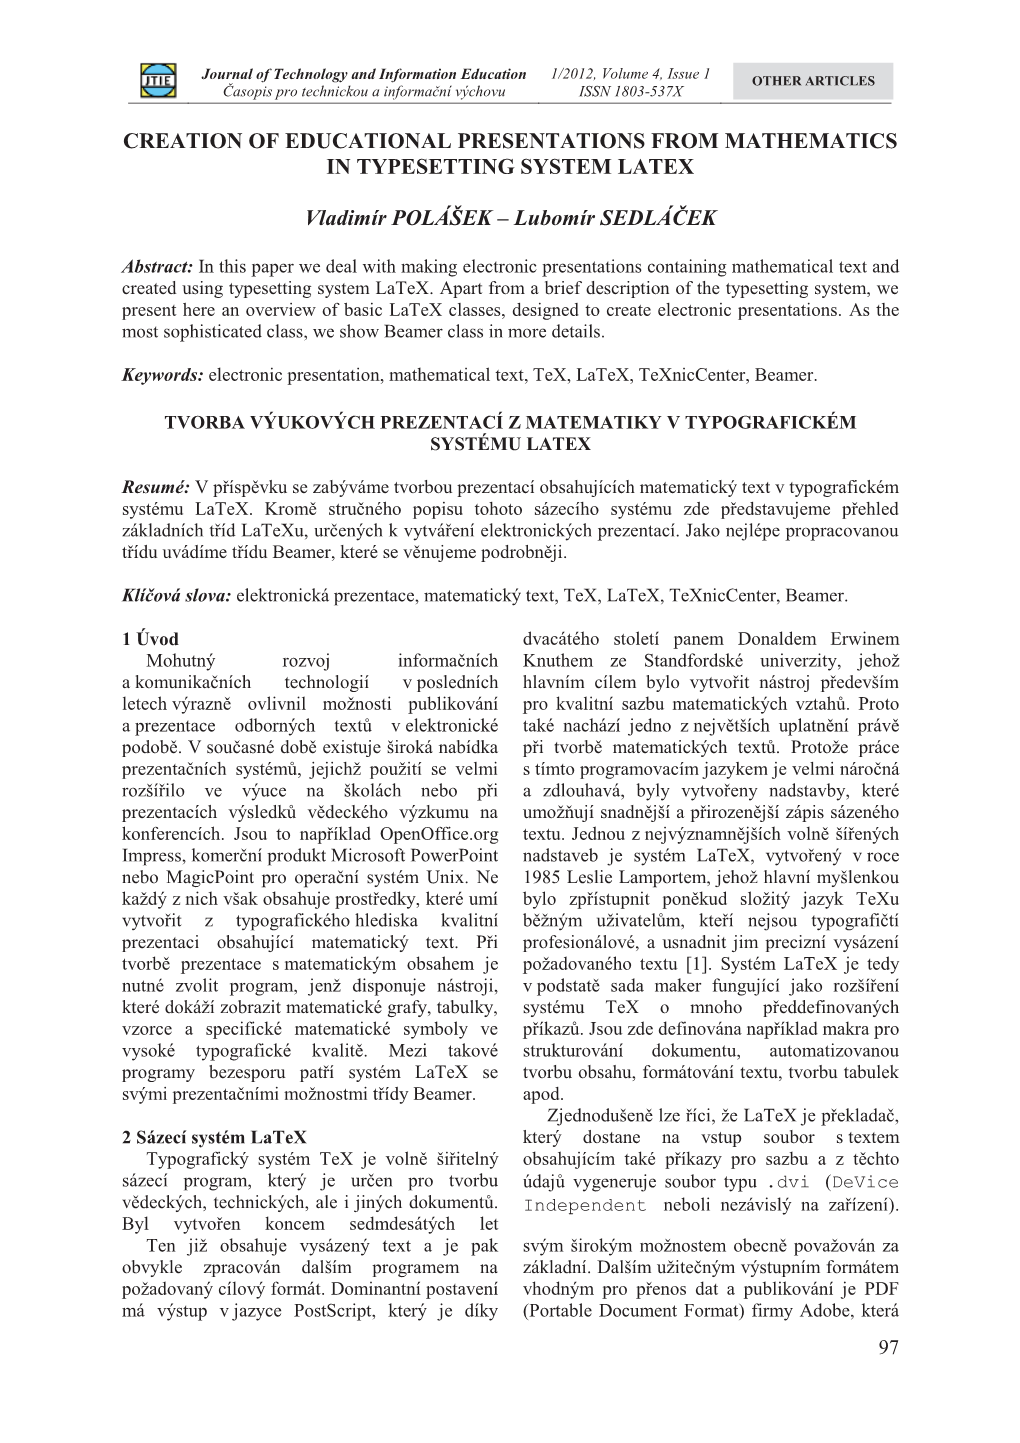 Creation of Educational Presentations from Mathematics in Typesetting System Latex